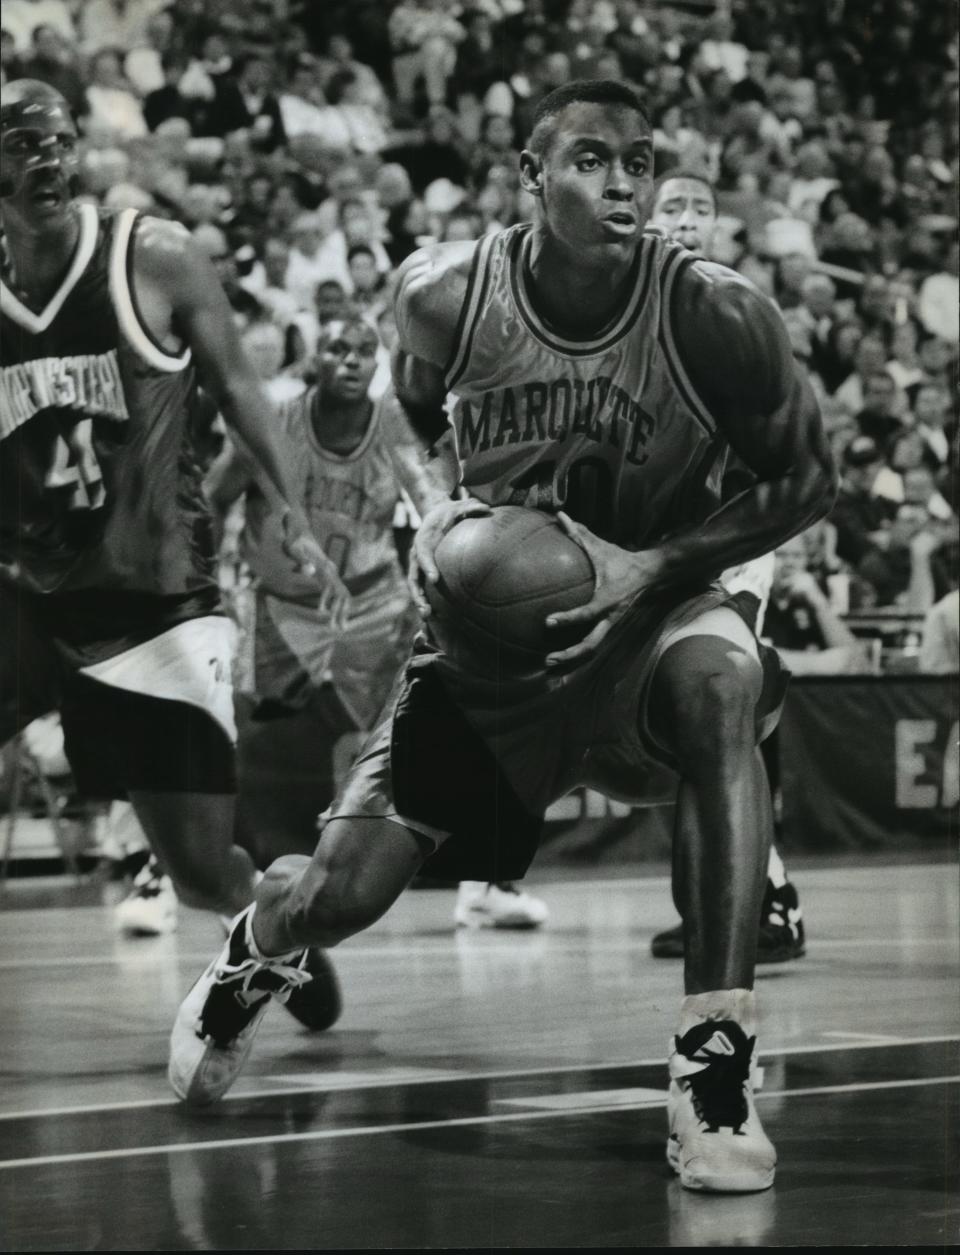 Faisal Abraham played at Marquette from 1993-97, and is fourth all-time with 172 blocks.